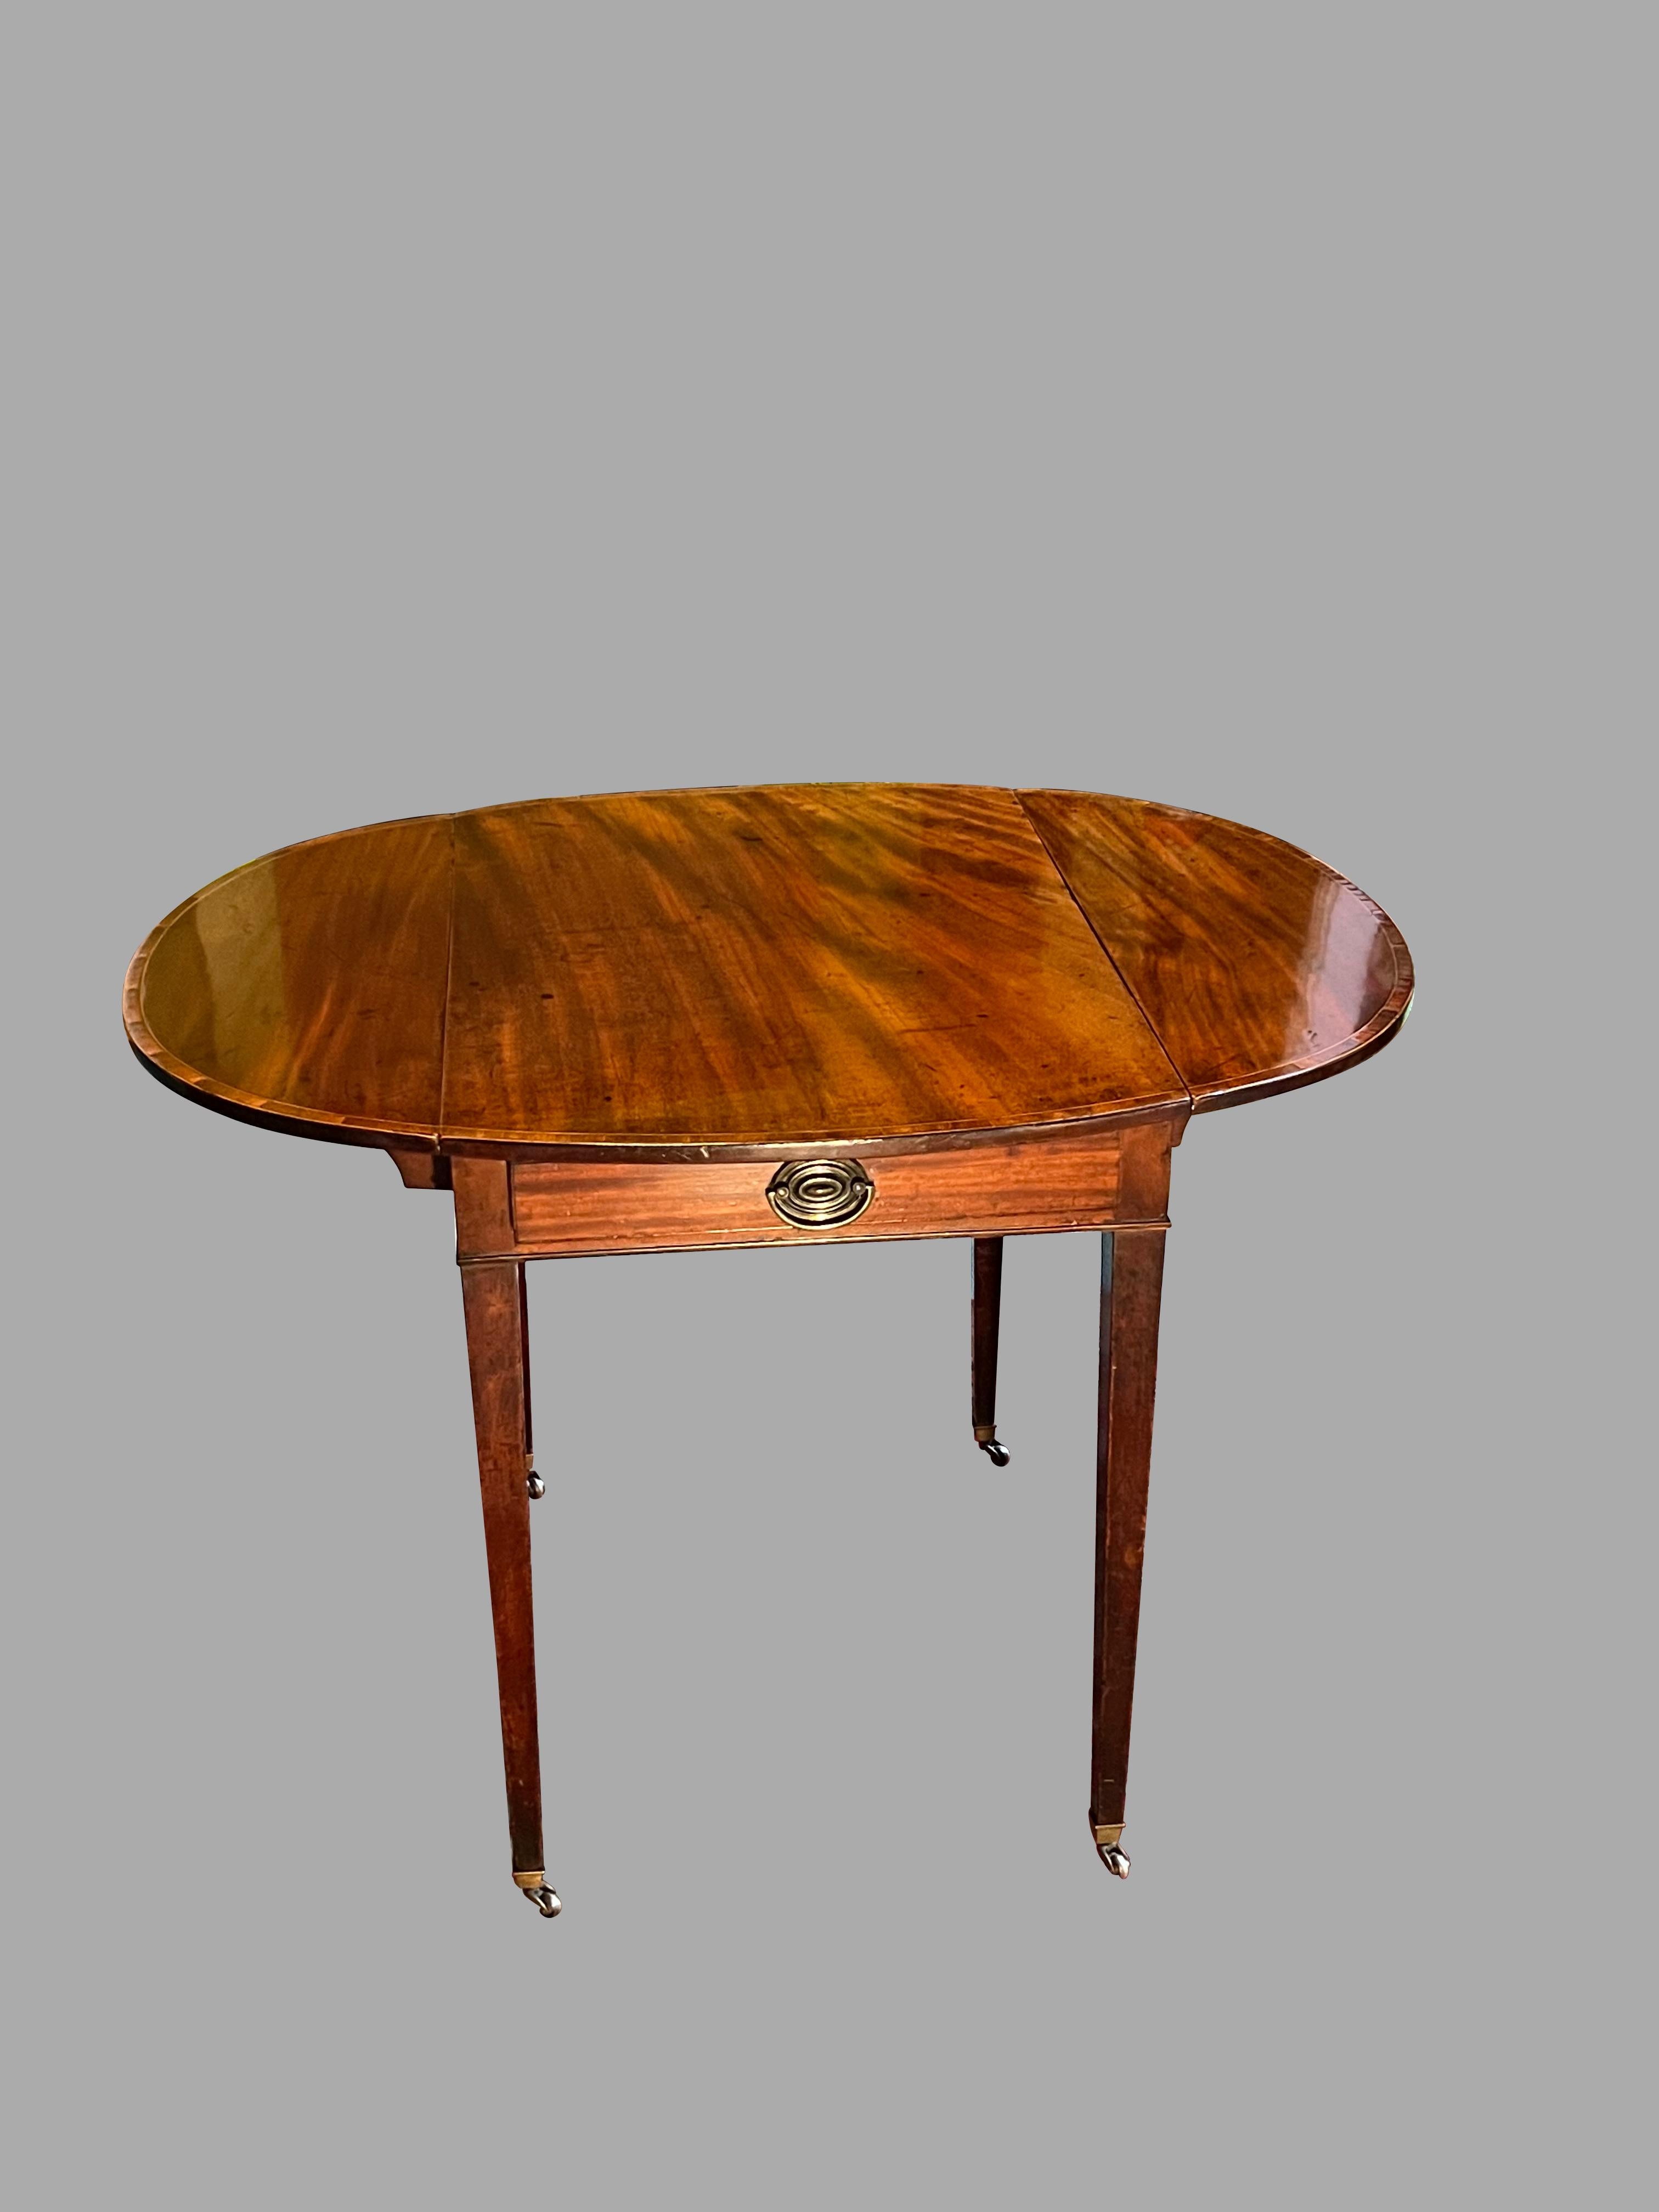 A fine English inlaid mahogany Hepplewhite period oval pembroke table of typical form, the crossbanded top with 2 drop sides over a single drawer, supported on square tapered legs ending in brass caps and casters. 
Lovely old color. This is an